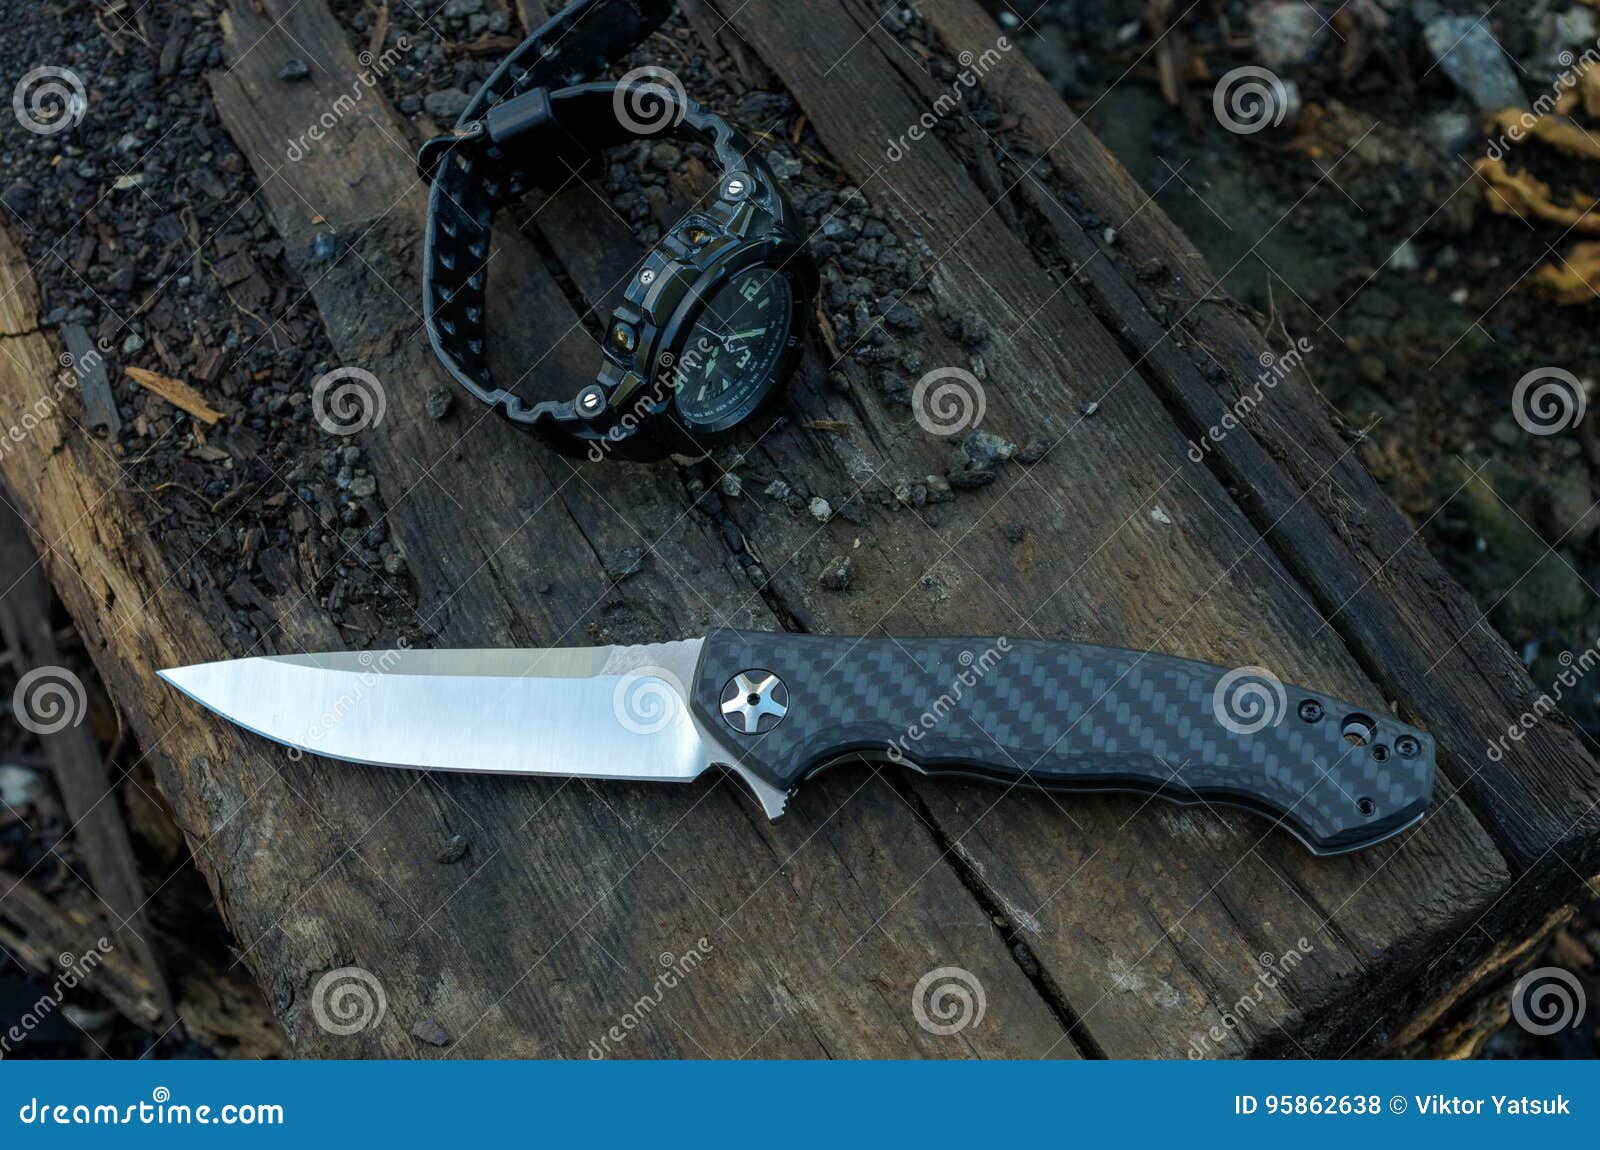 https://thumbs.dreamstime.com/z/male-set-knives-watches-black-knife-watch-wood-background-95862638.jpg